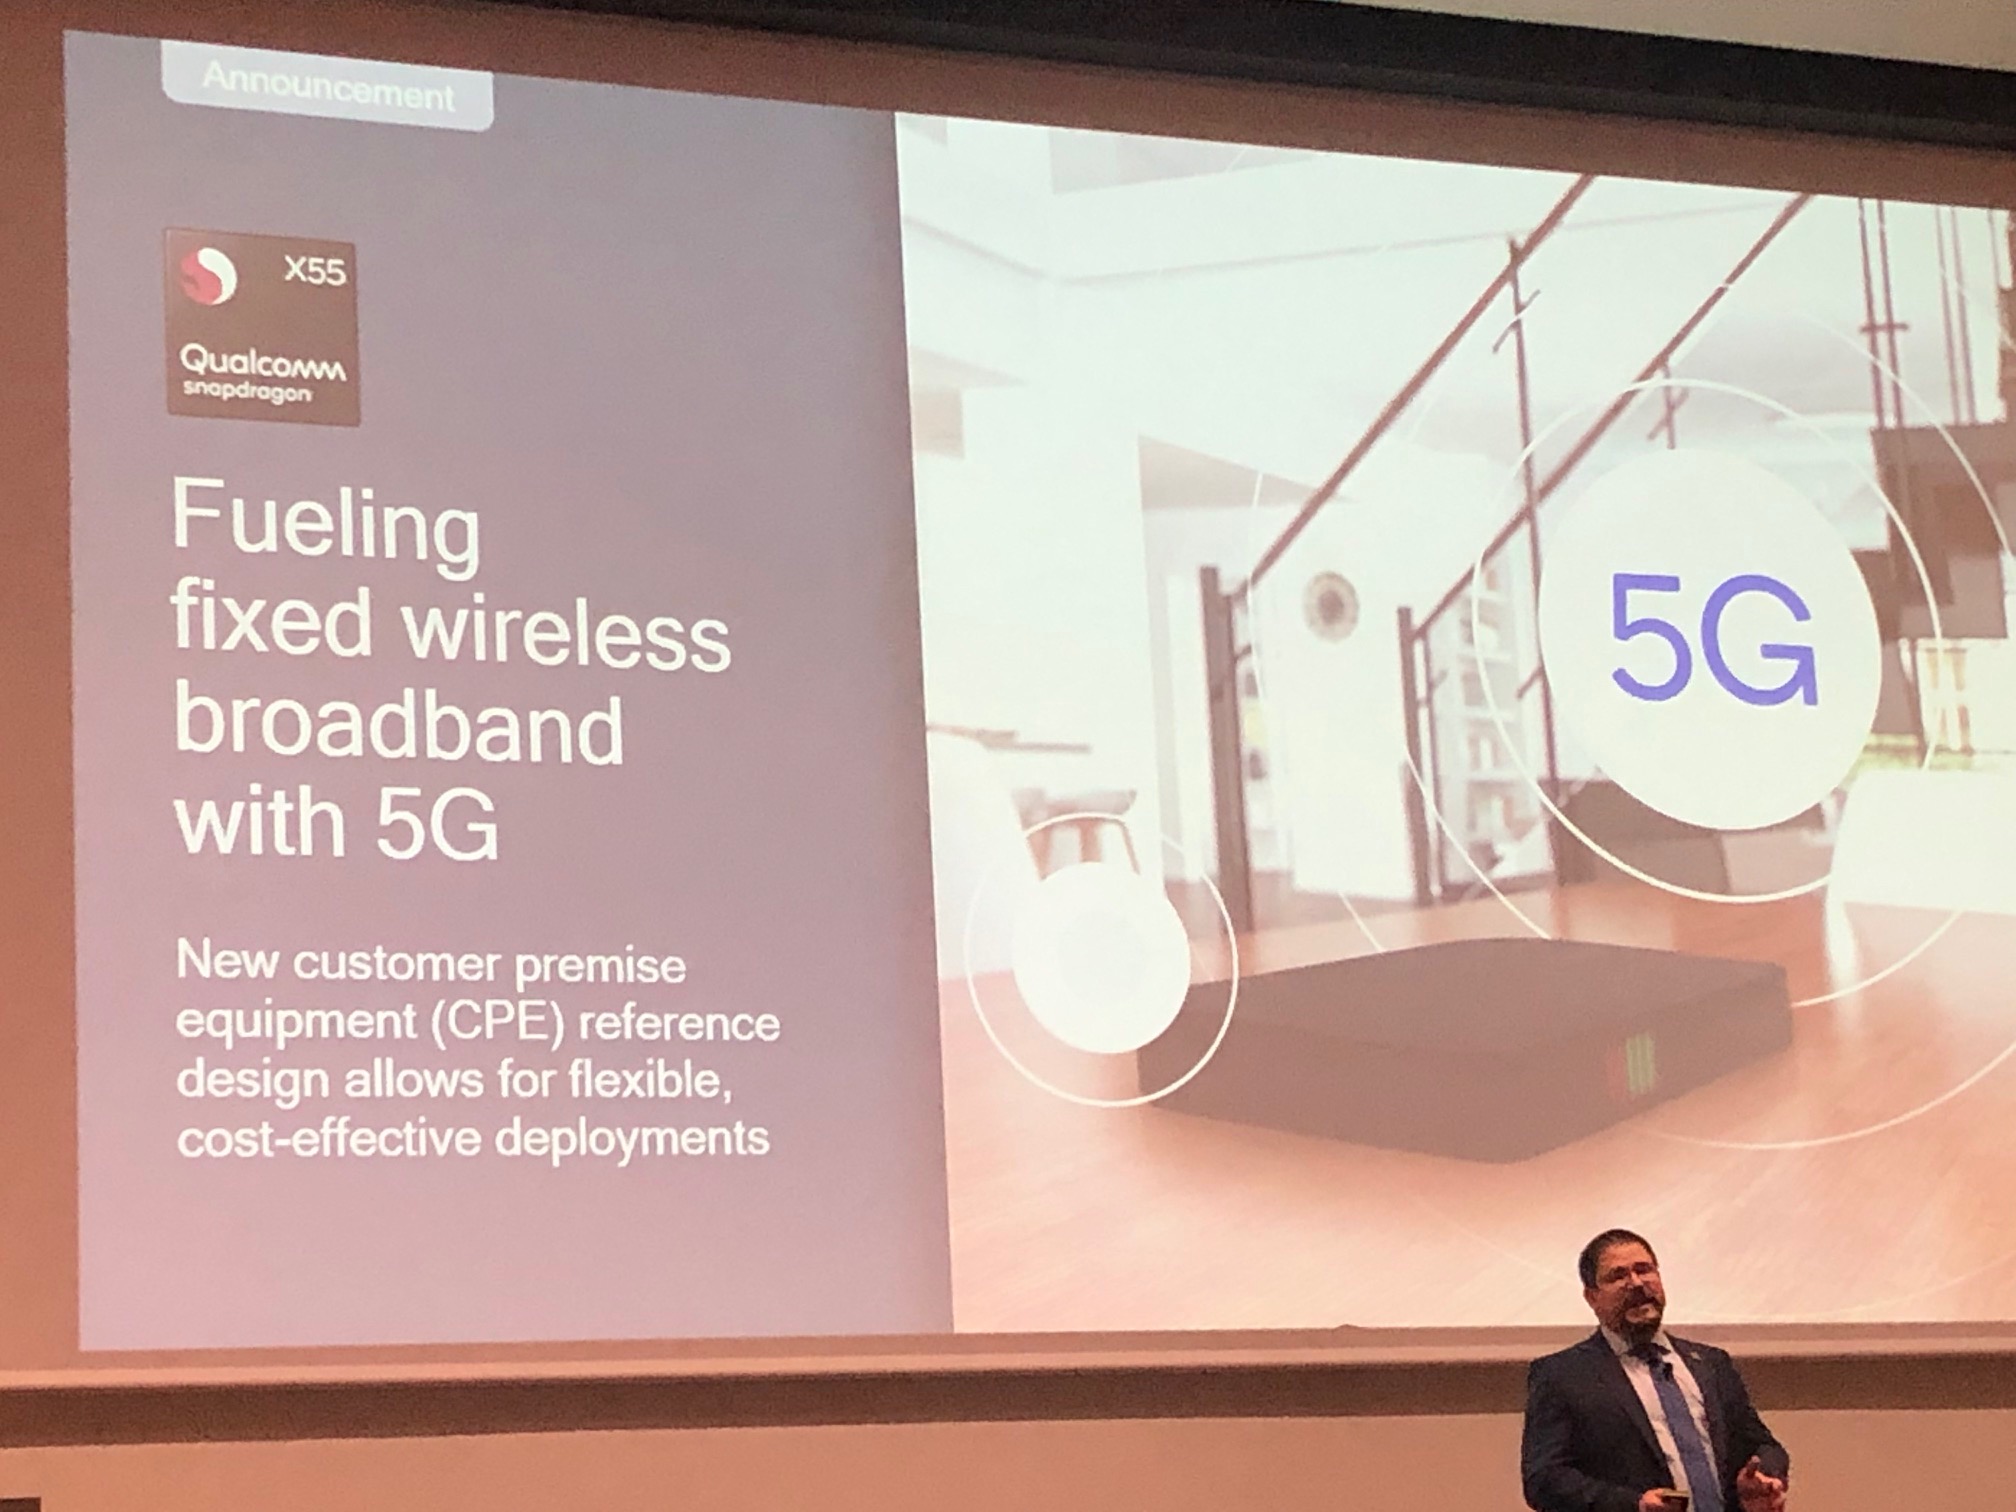 jammer gun owners should - Qualcomm Debuts CPE Reference Design for Fixed Wireless 5G Broadband